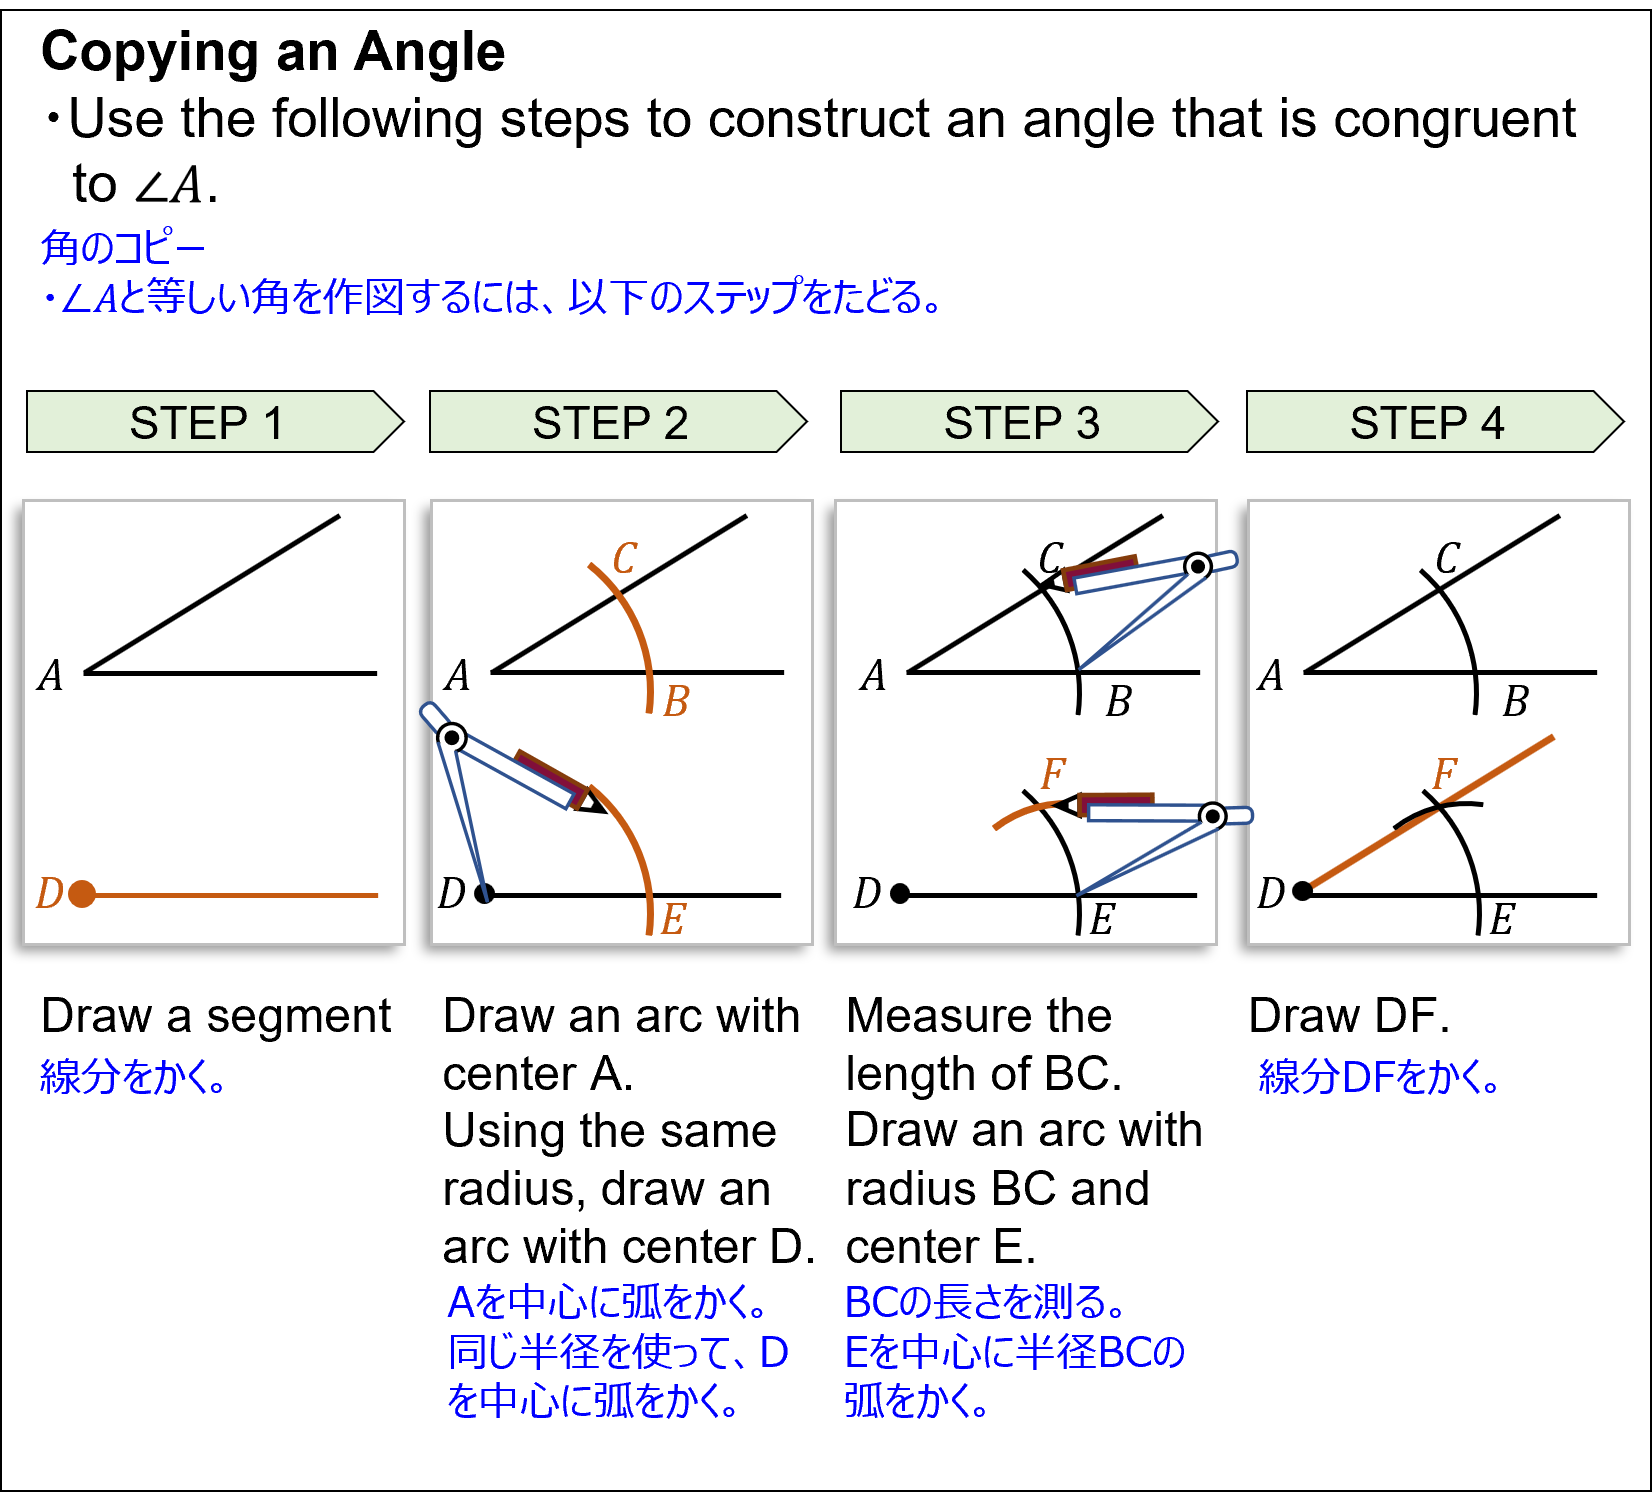 Illustrating how to copy an angle